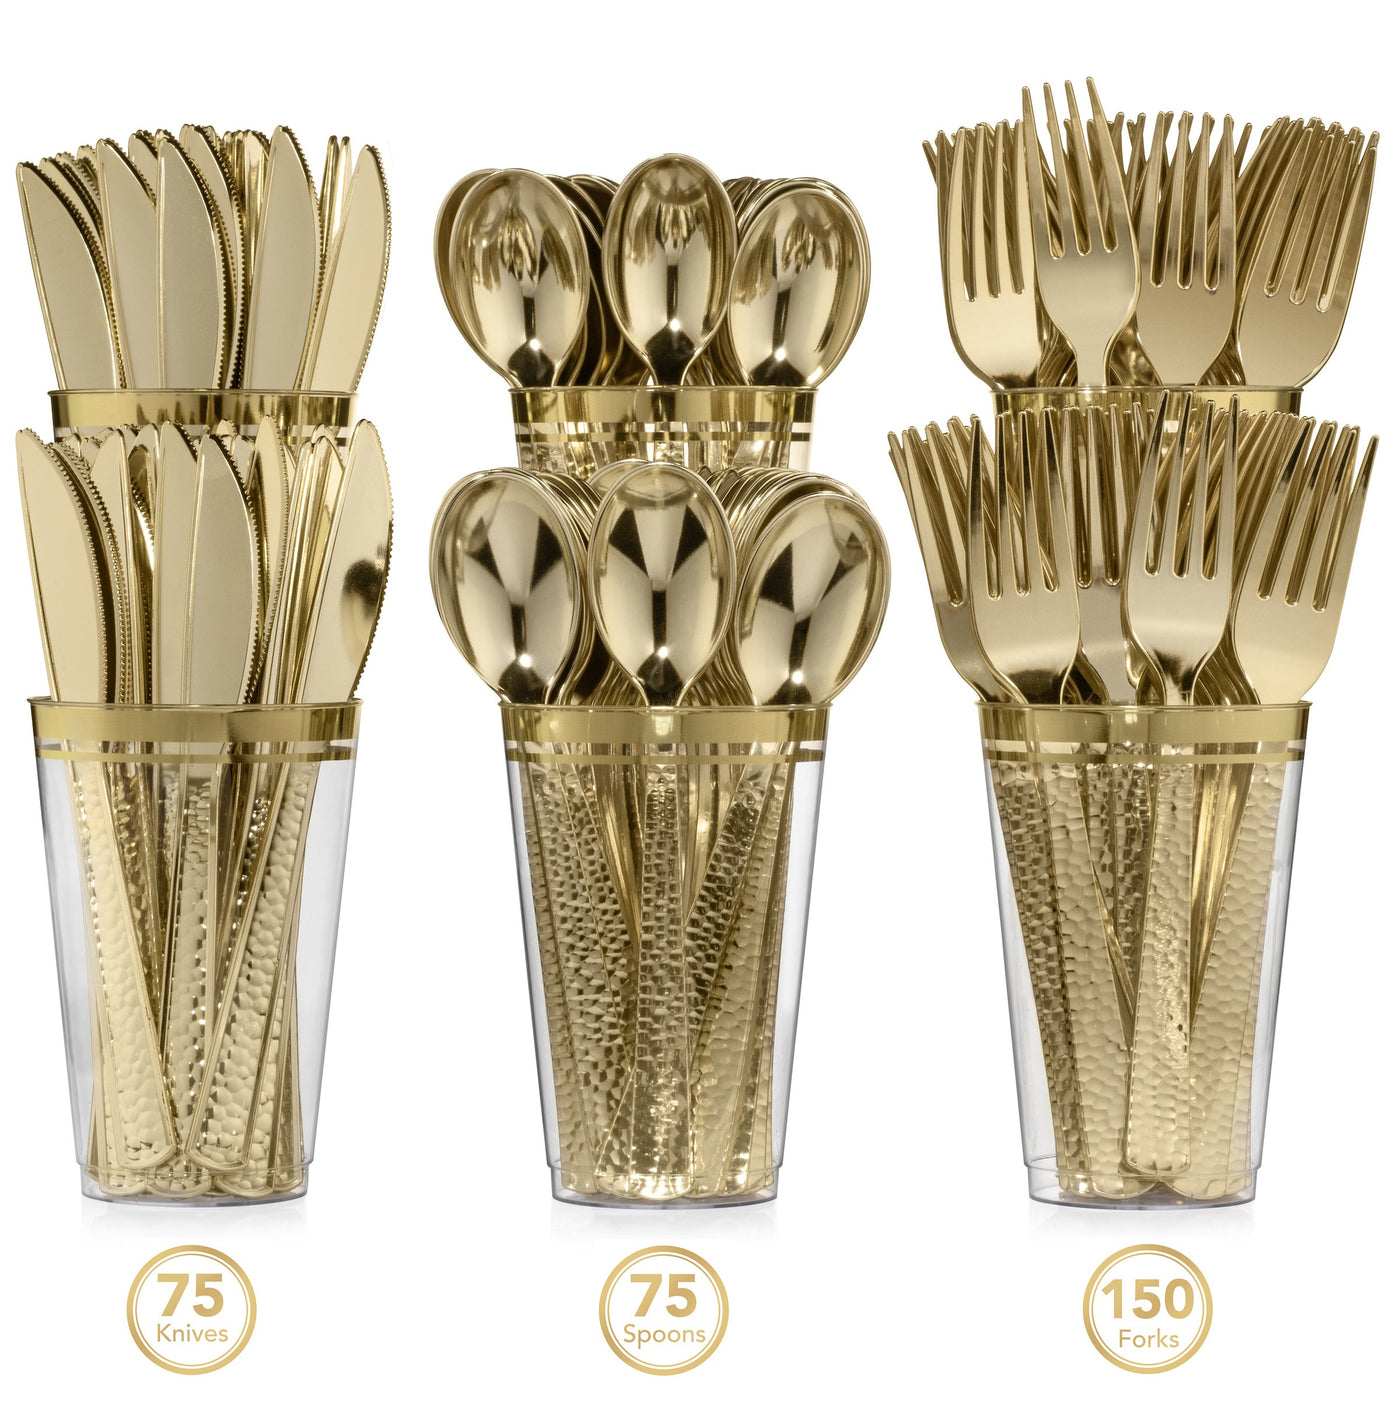 300 Pieces Gold Plastic Disposable Cutlery Set - Metallic Plastic with a Hammered Finish - 75 Spoons, 75 Knives, 150 Forks